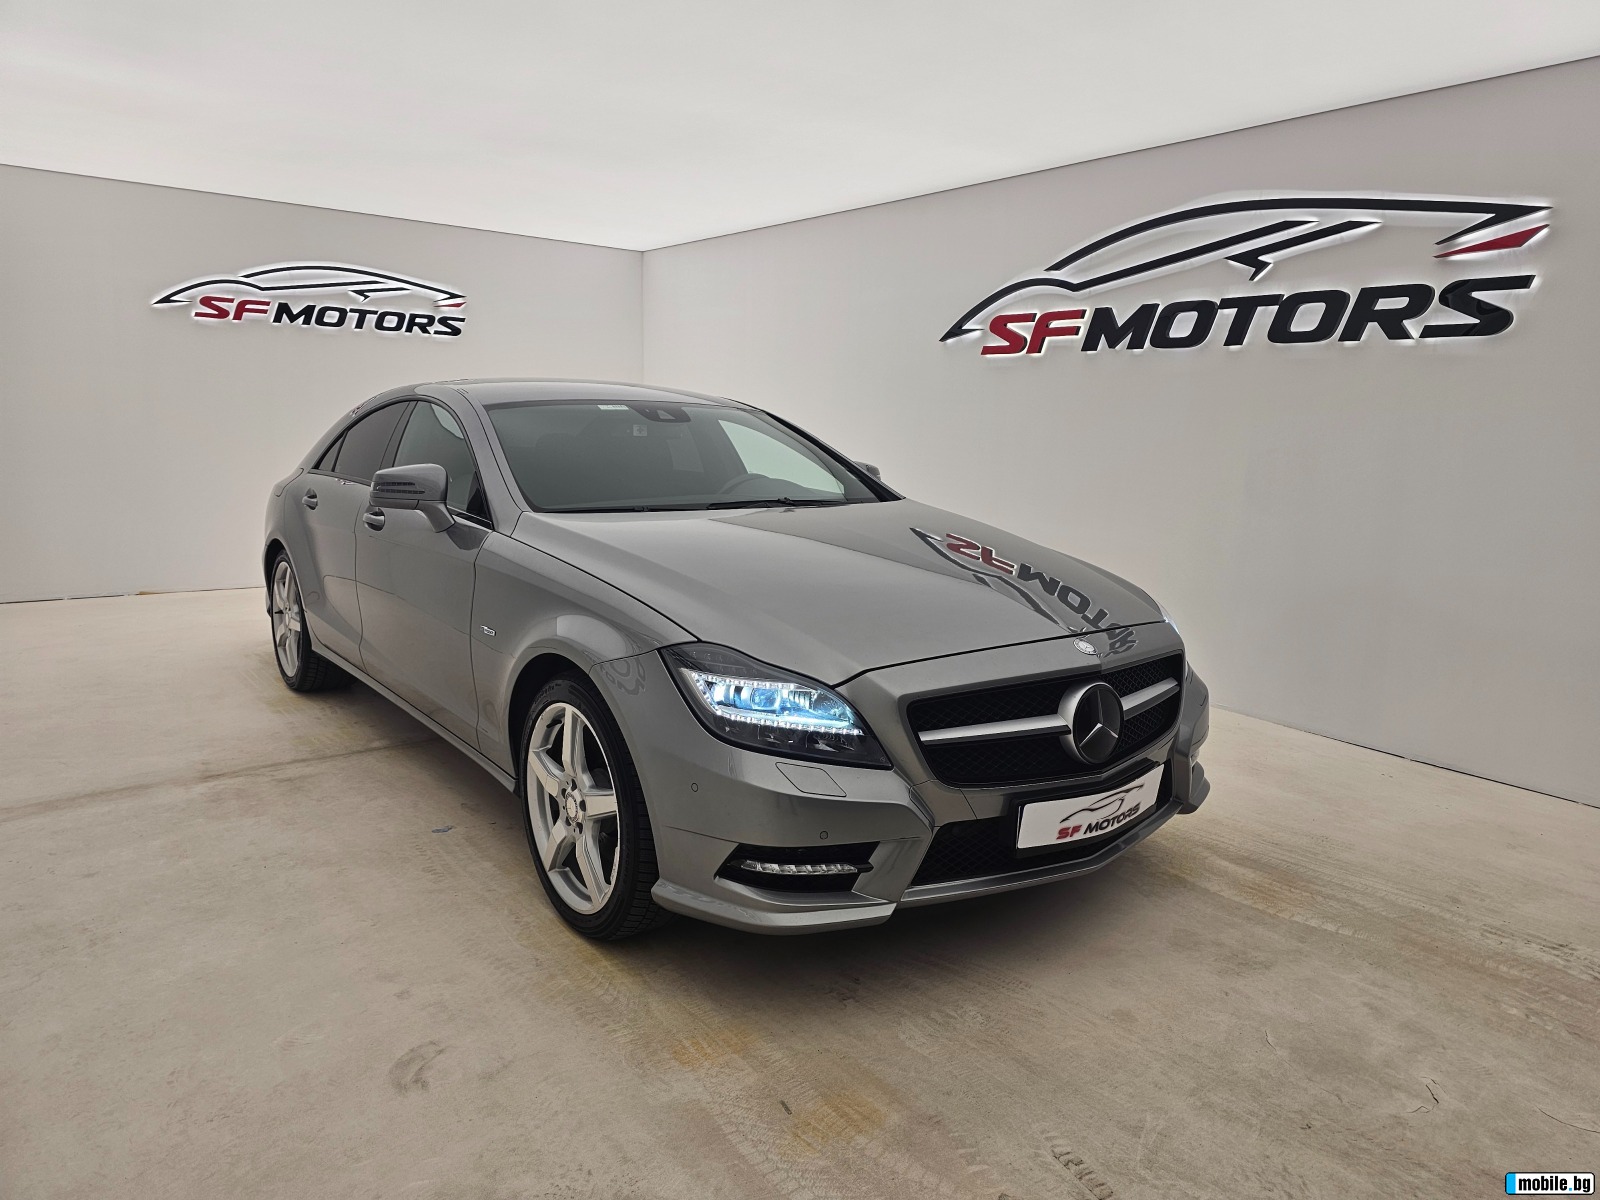 Mercedes-Benz CLS 350 AMG OPTIC CDI 4MATIC BlueEFFICIENCY | Mobile.bg   1